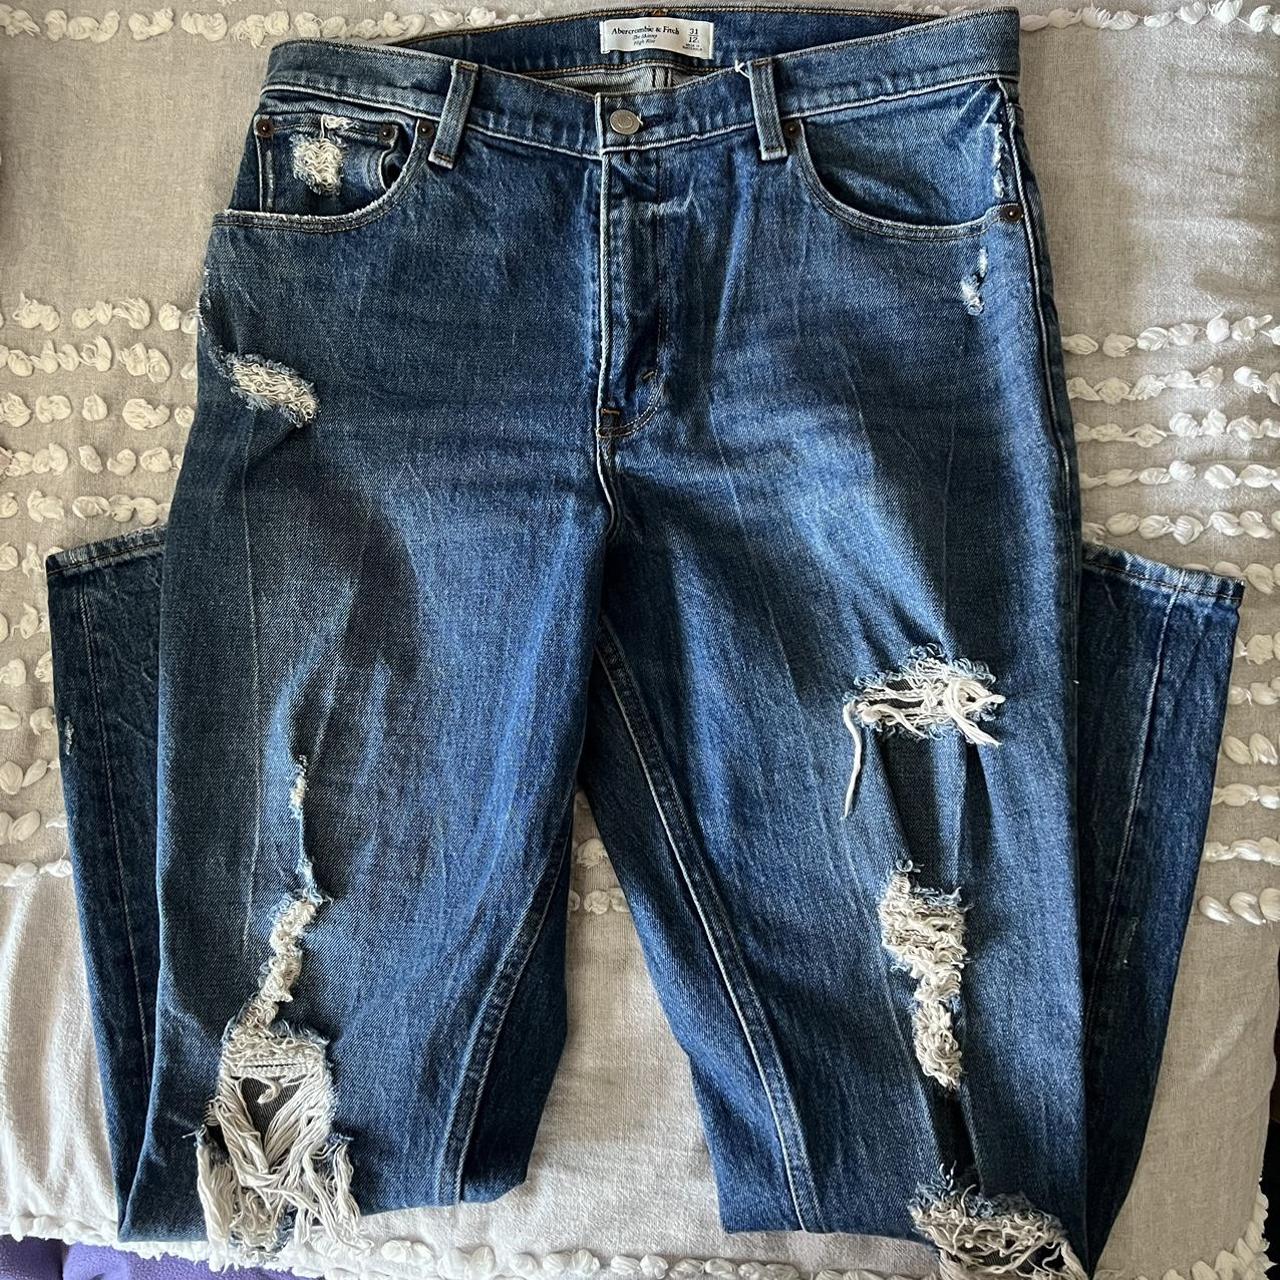 Abercrombie and Fitch Skinny High Rise Jeans Size 31... - Depop